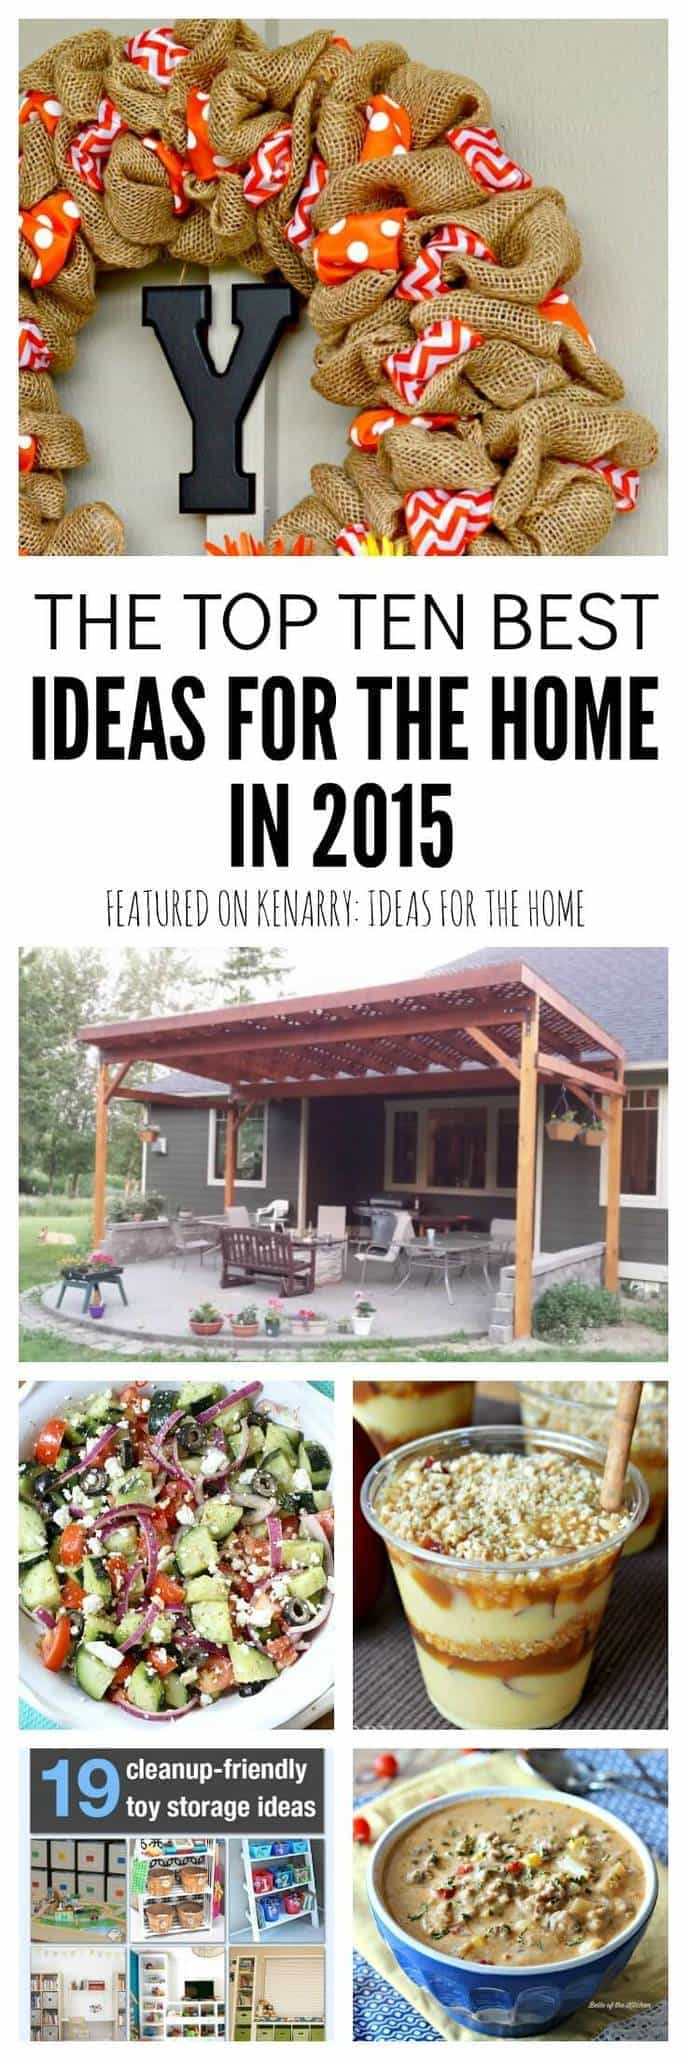 Top 10 best ideas for the home including the most viewed recipes, home decor and DIY projects - Kenarry.com